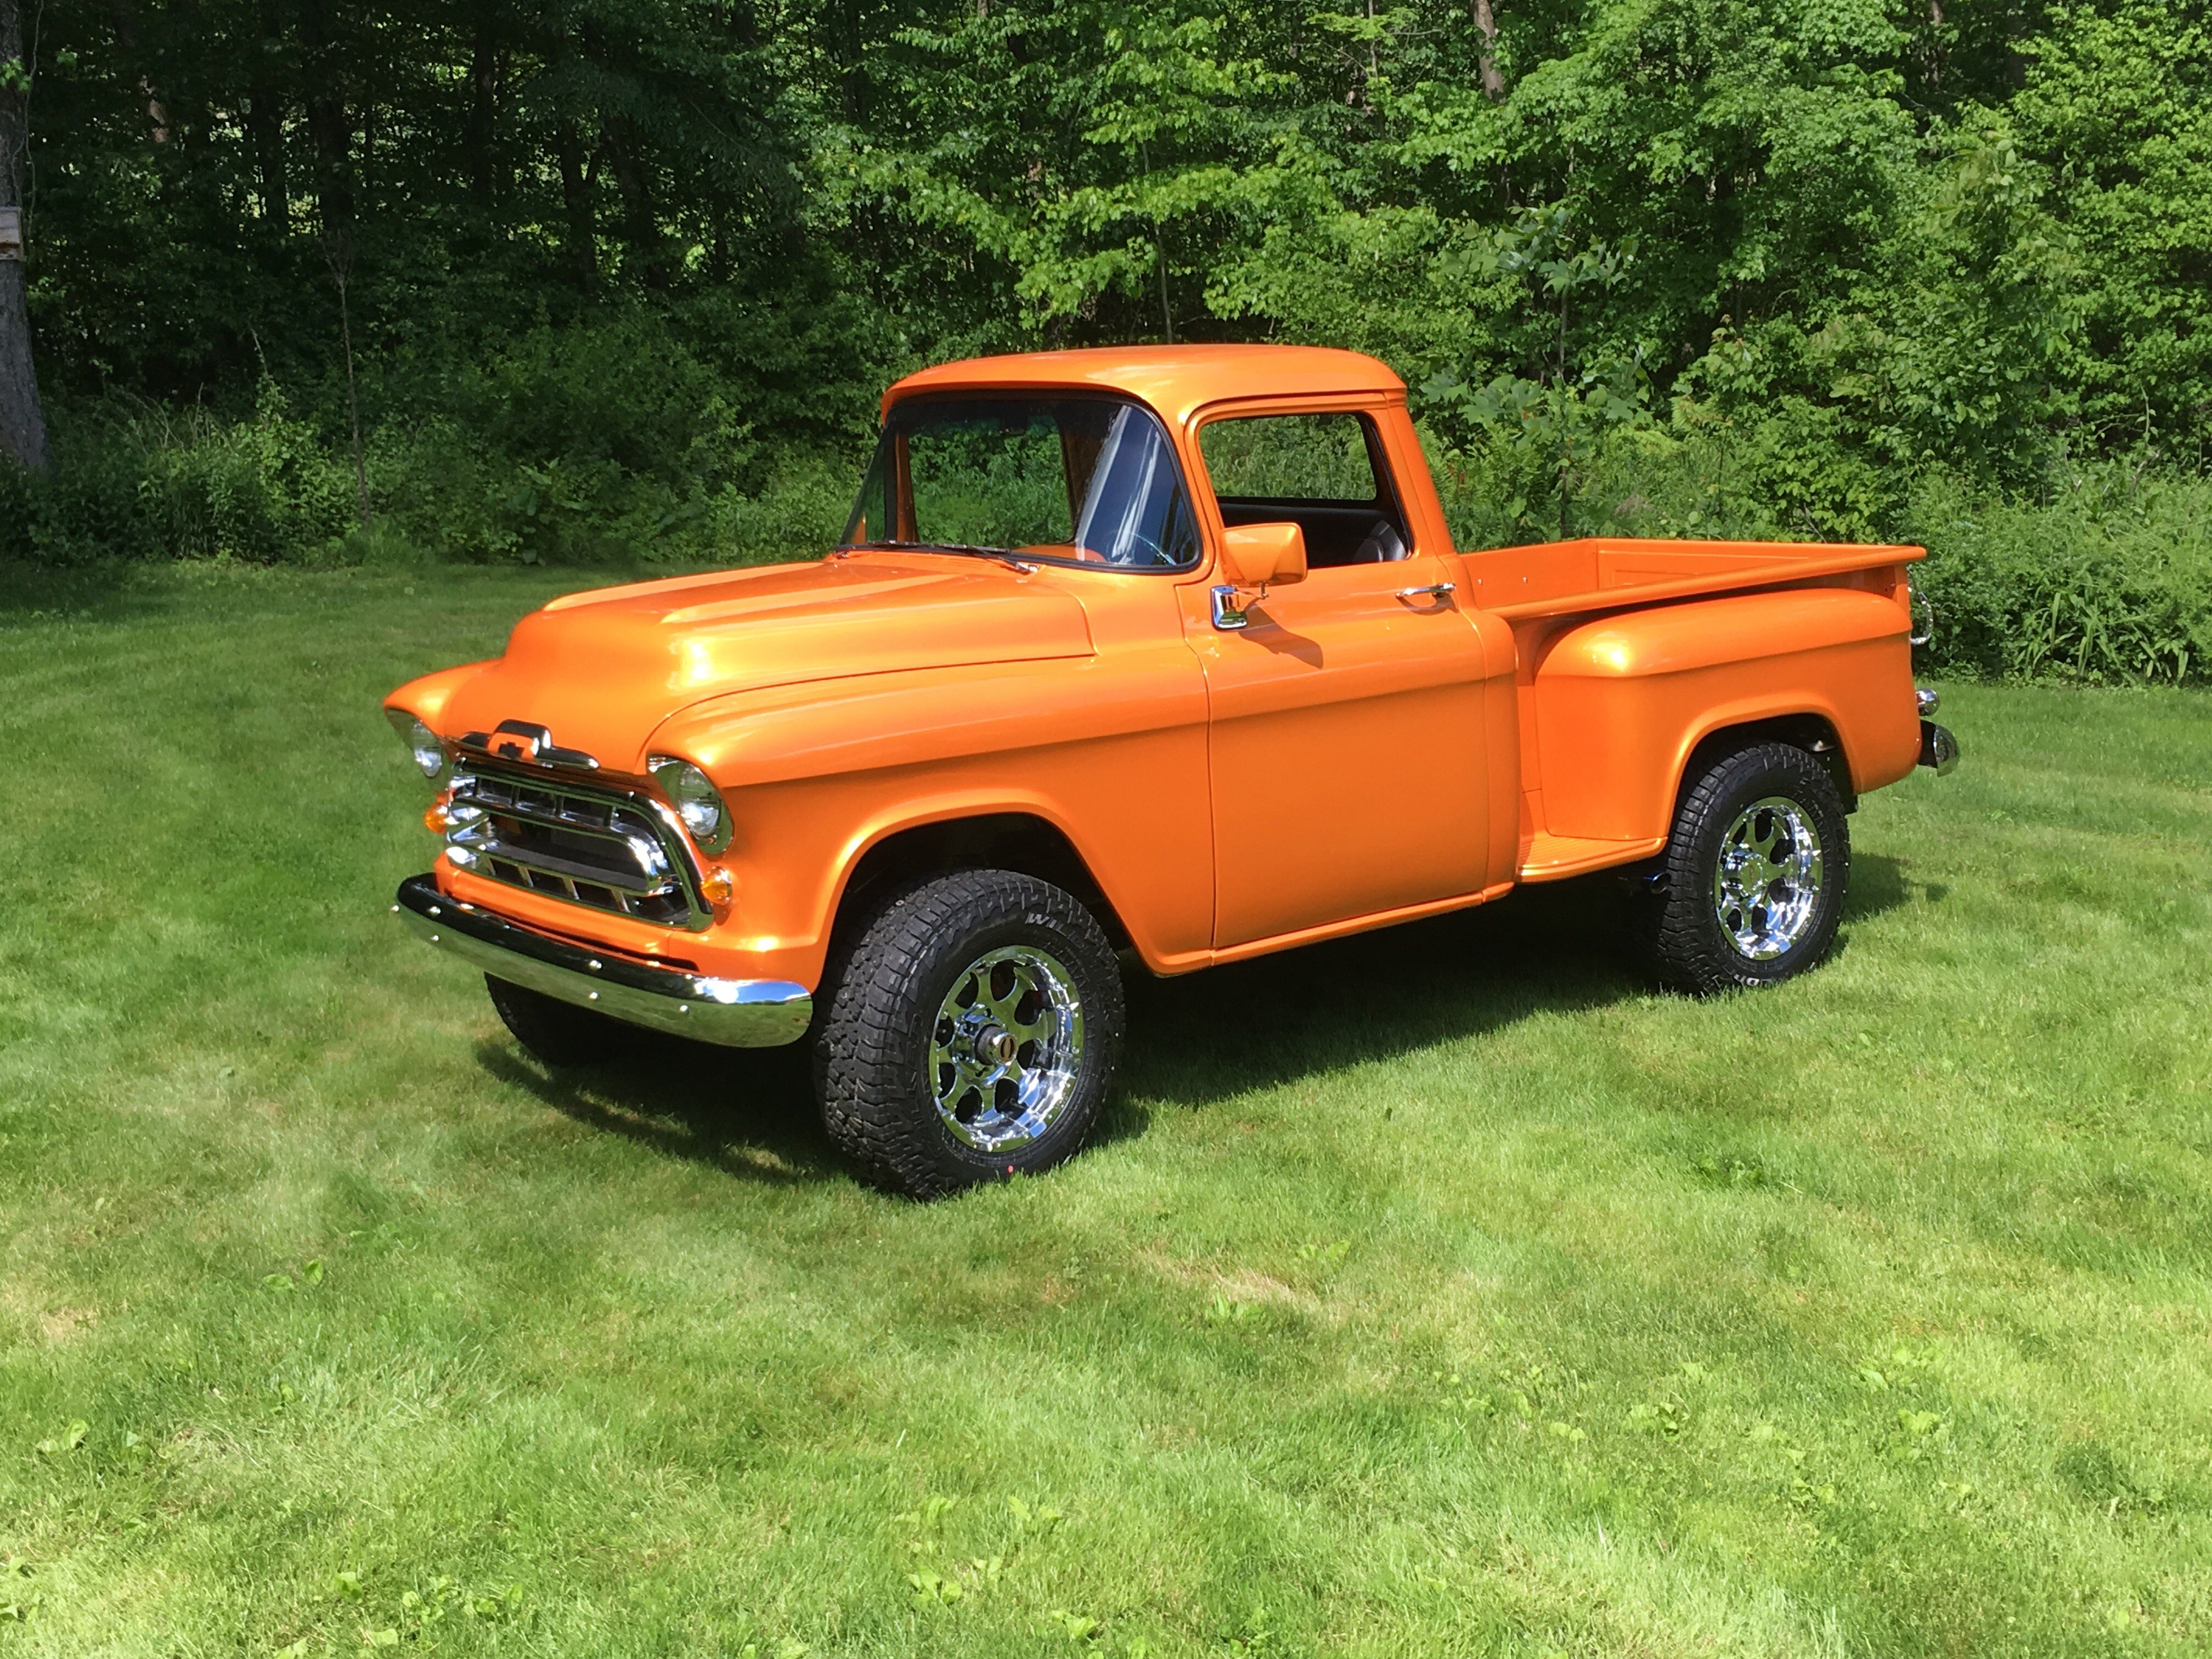 1957 Chevrolet 3100 for sale near Southbury, Connecticut 06488  Classics on Autotrader